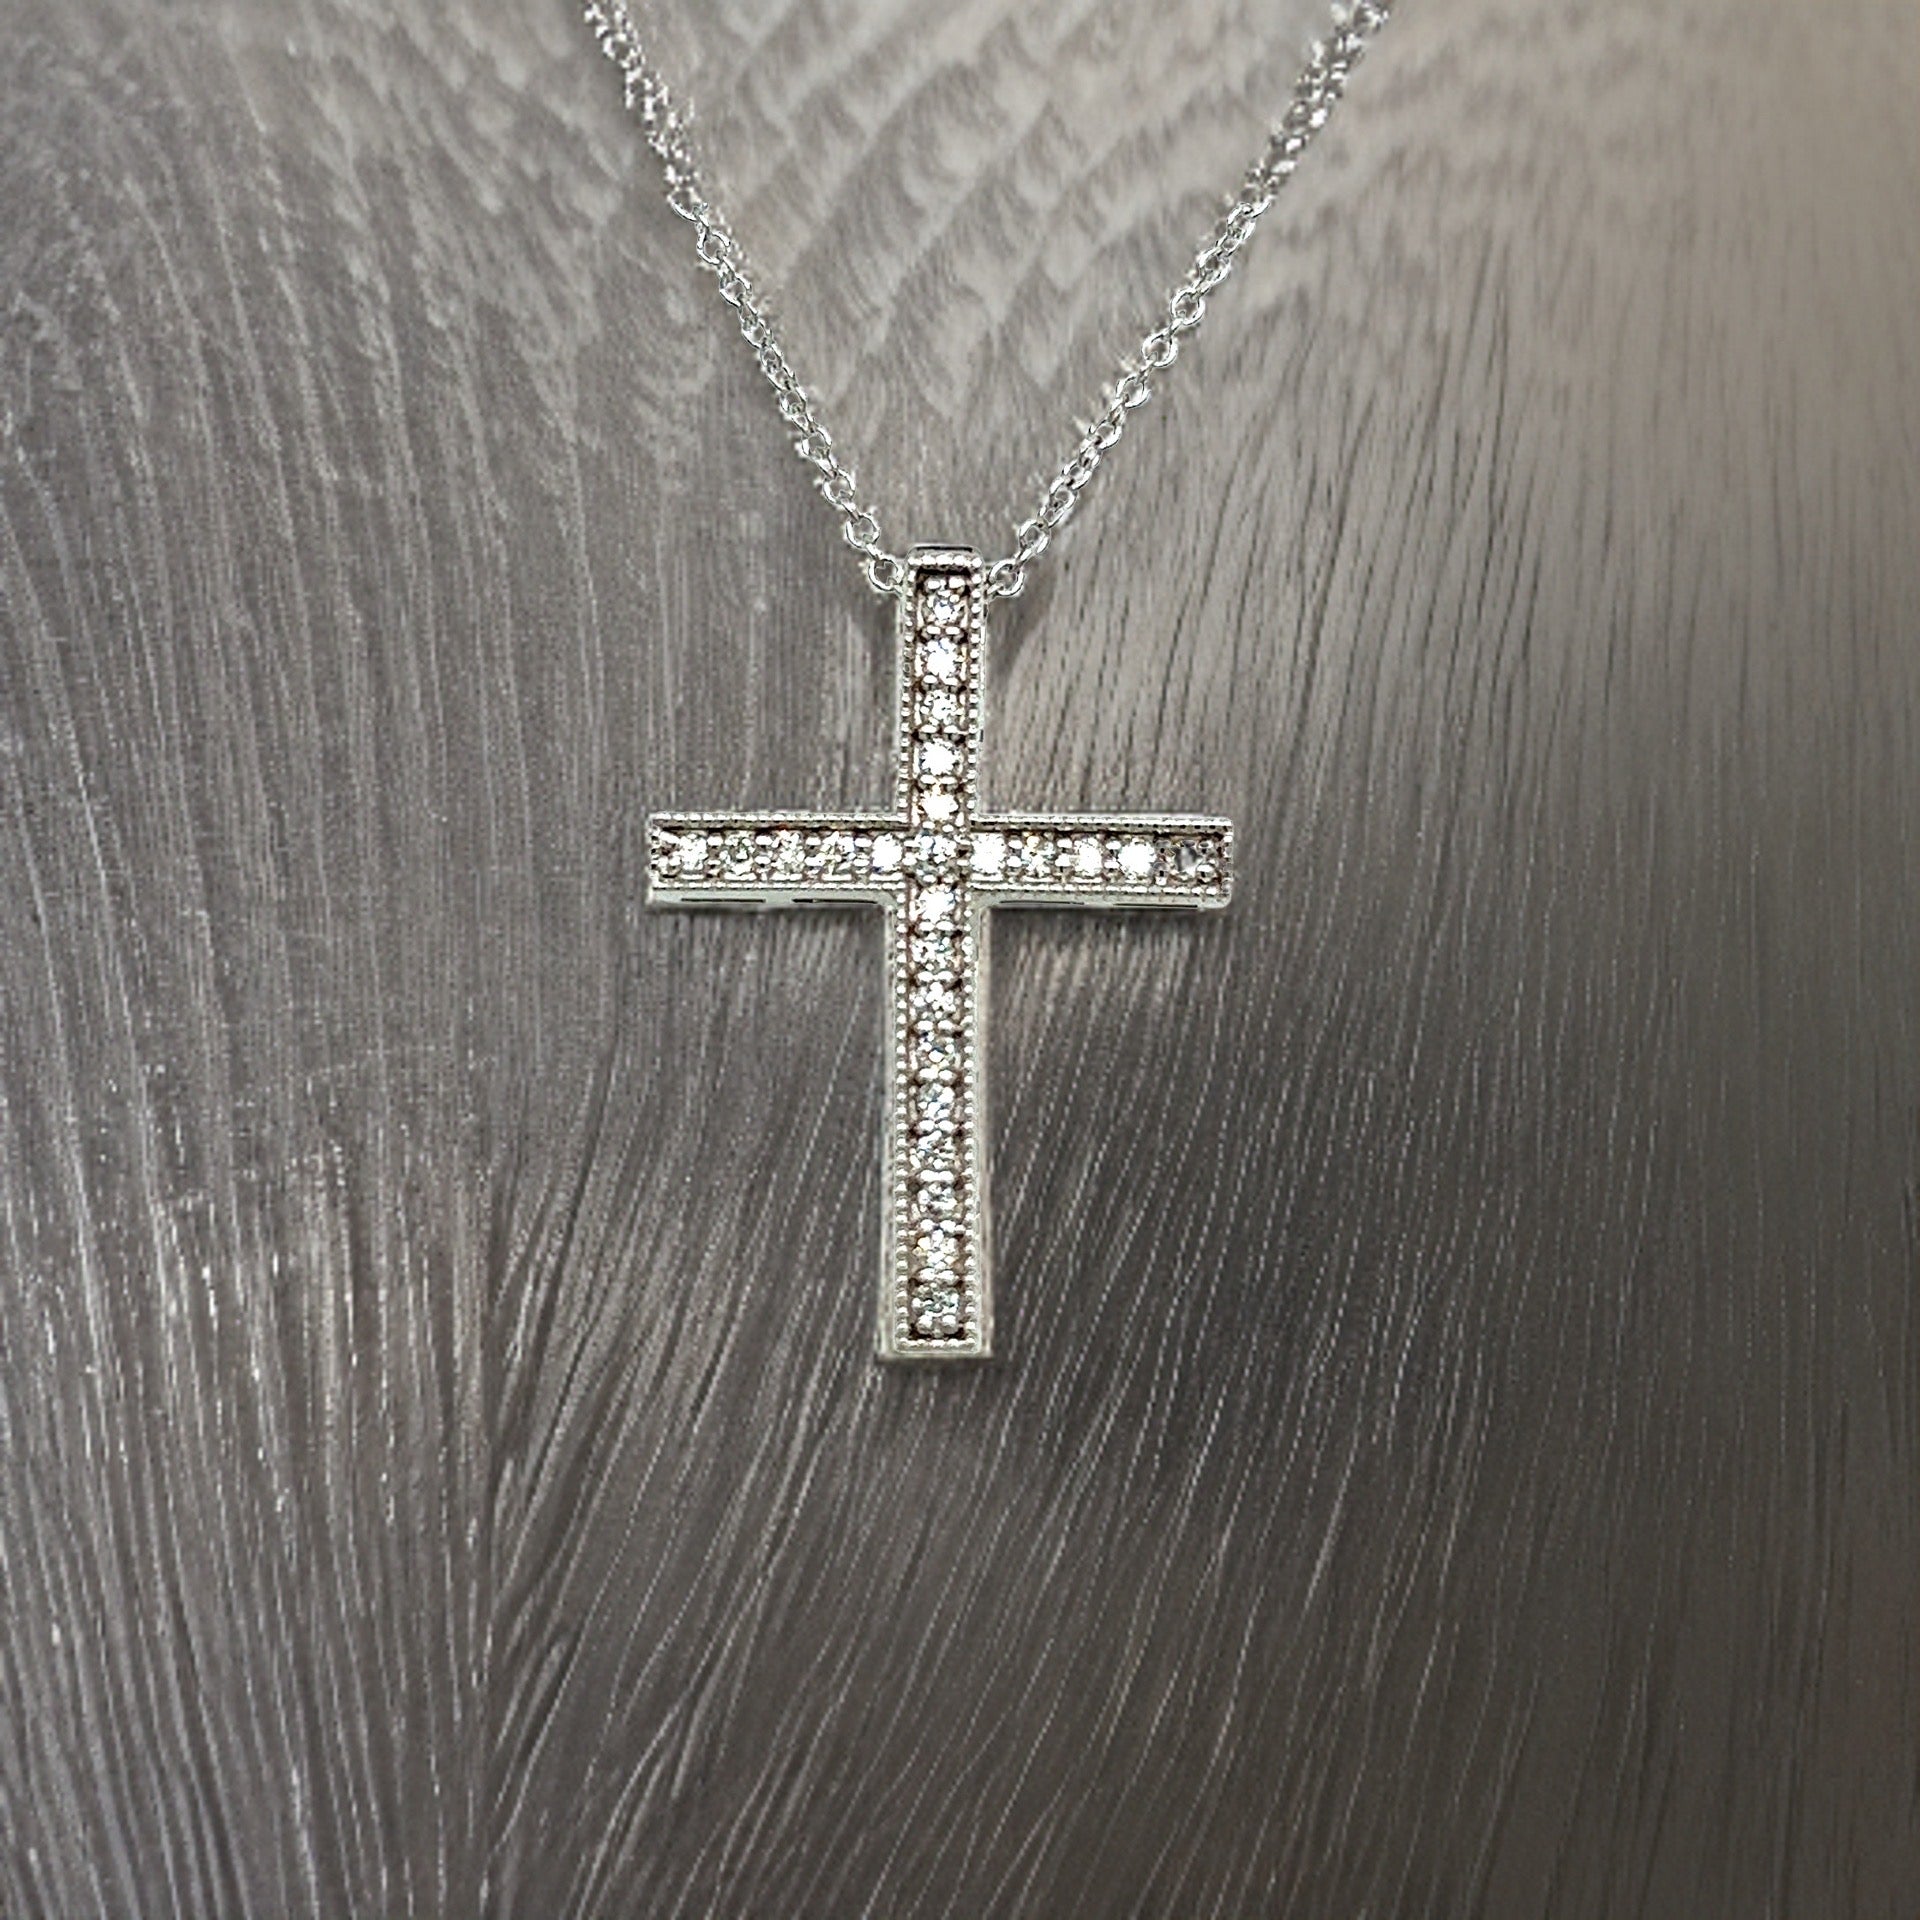 Natural Diamond Cross Pendant with Chain 17" 14k W Gold 0.25 CT Certified $2,950 307922 - Certified Fine Jewelry